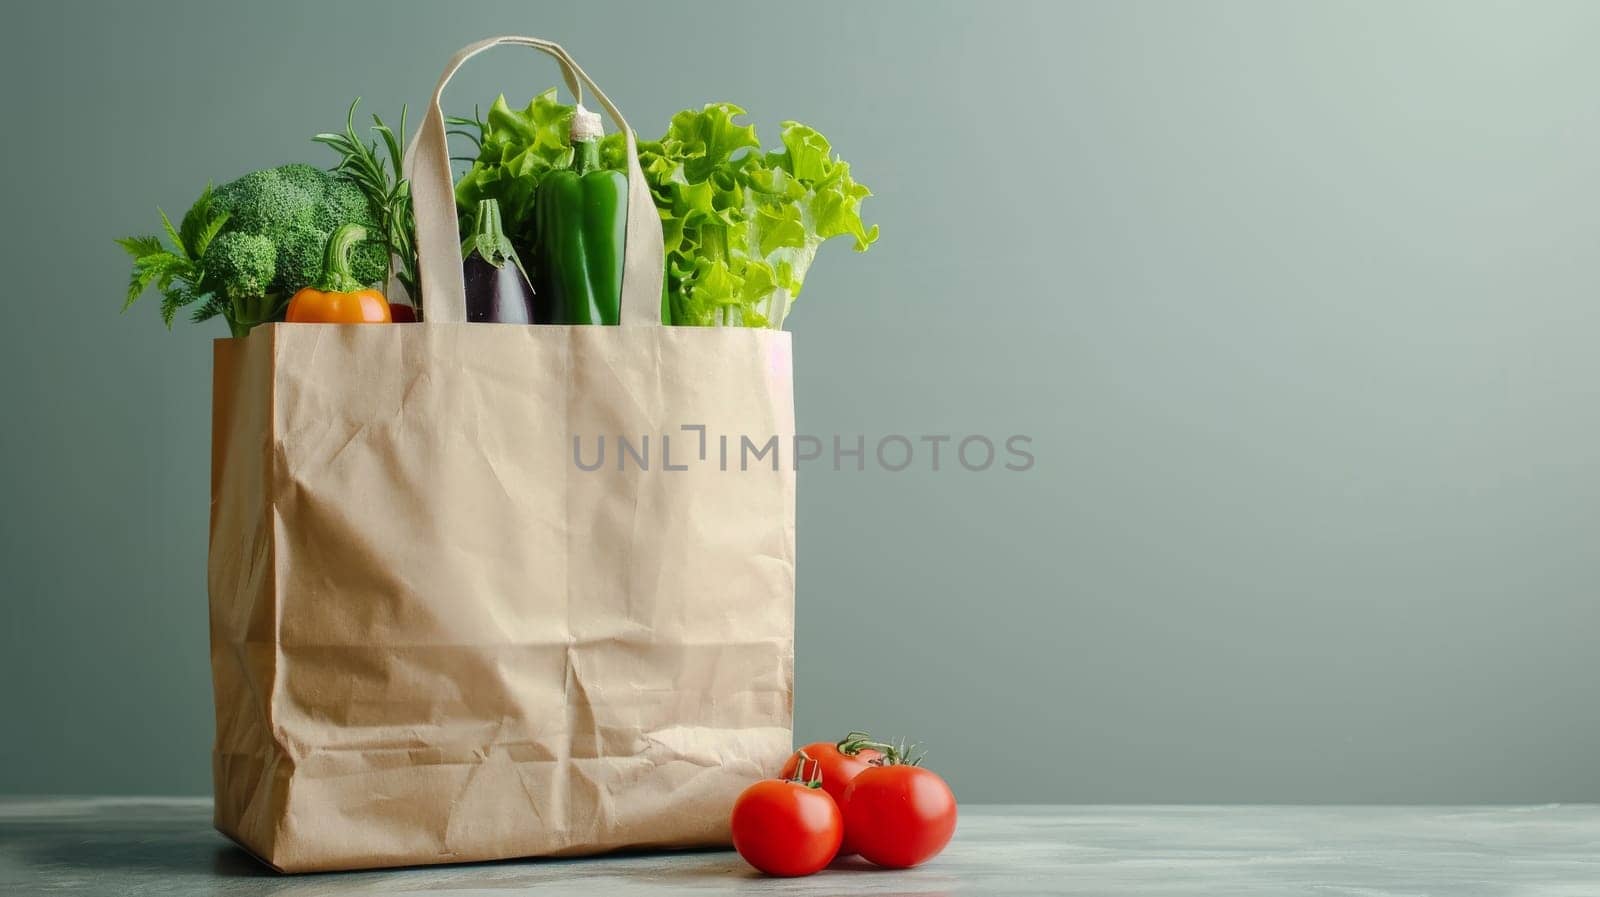 A brown paper bag filled with vegetables including tomatoes, broccoli by itchaznong